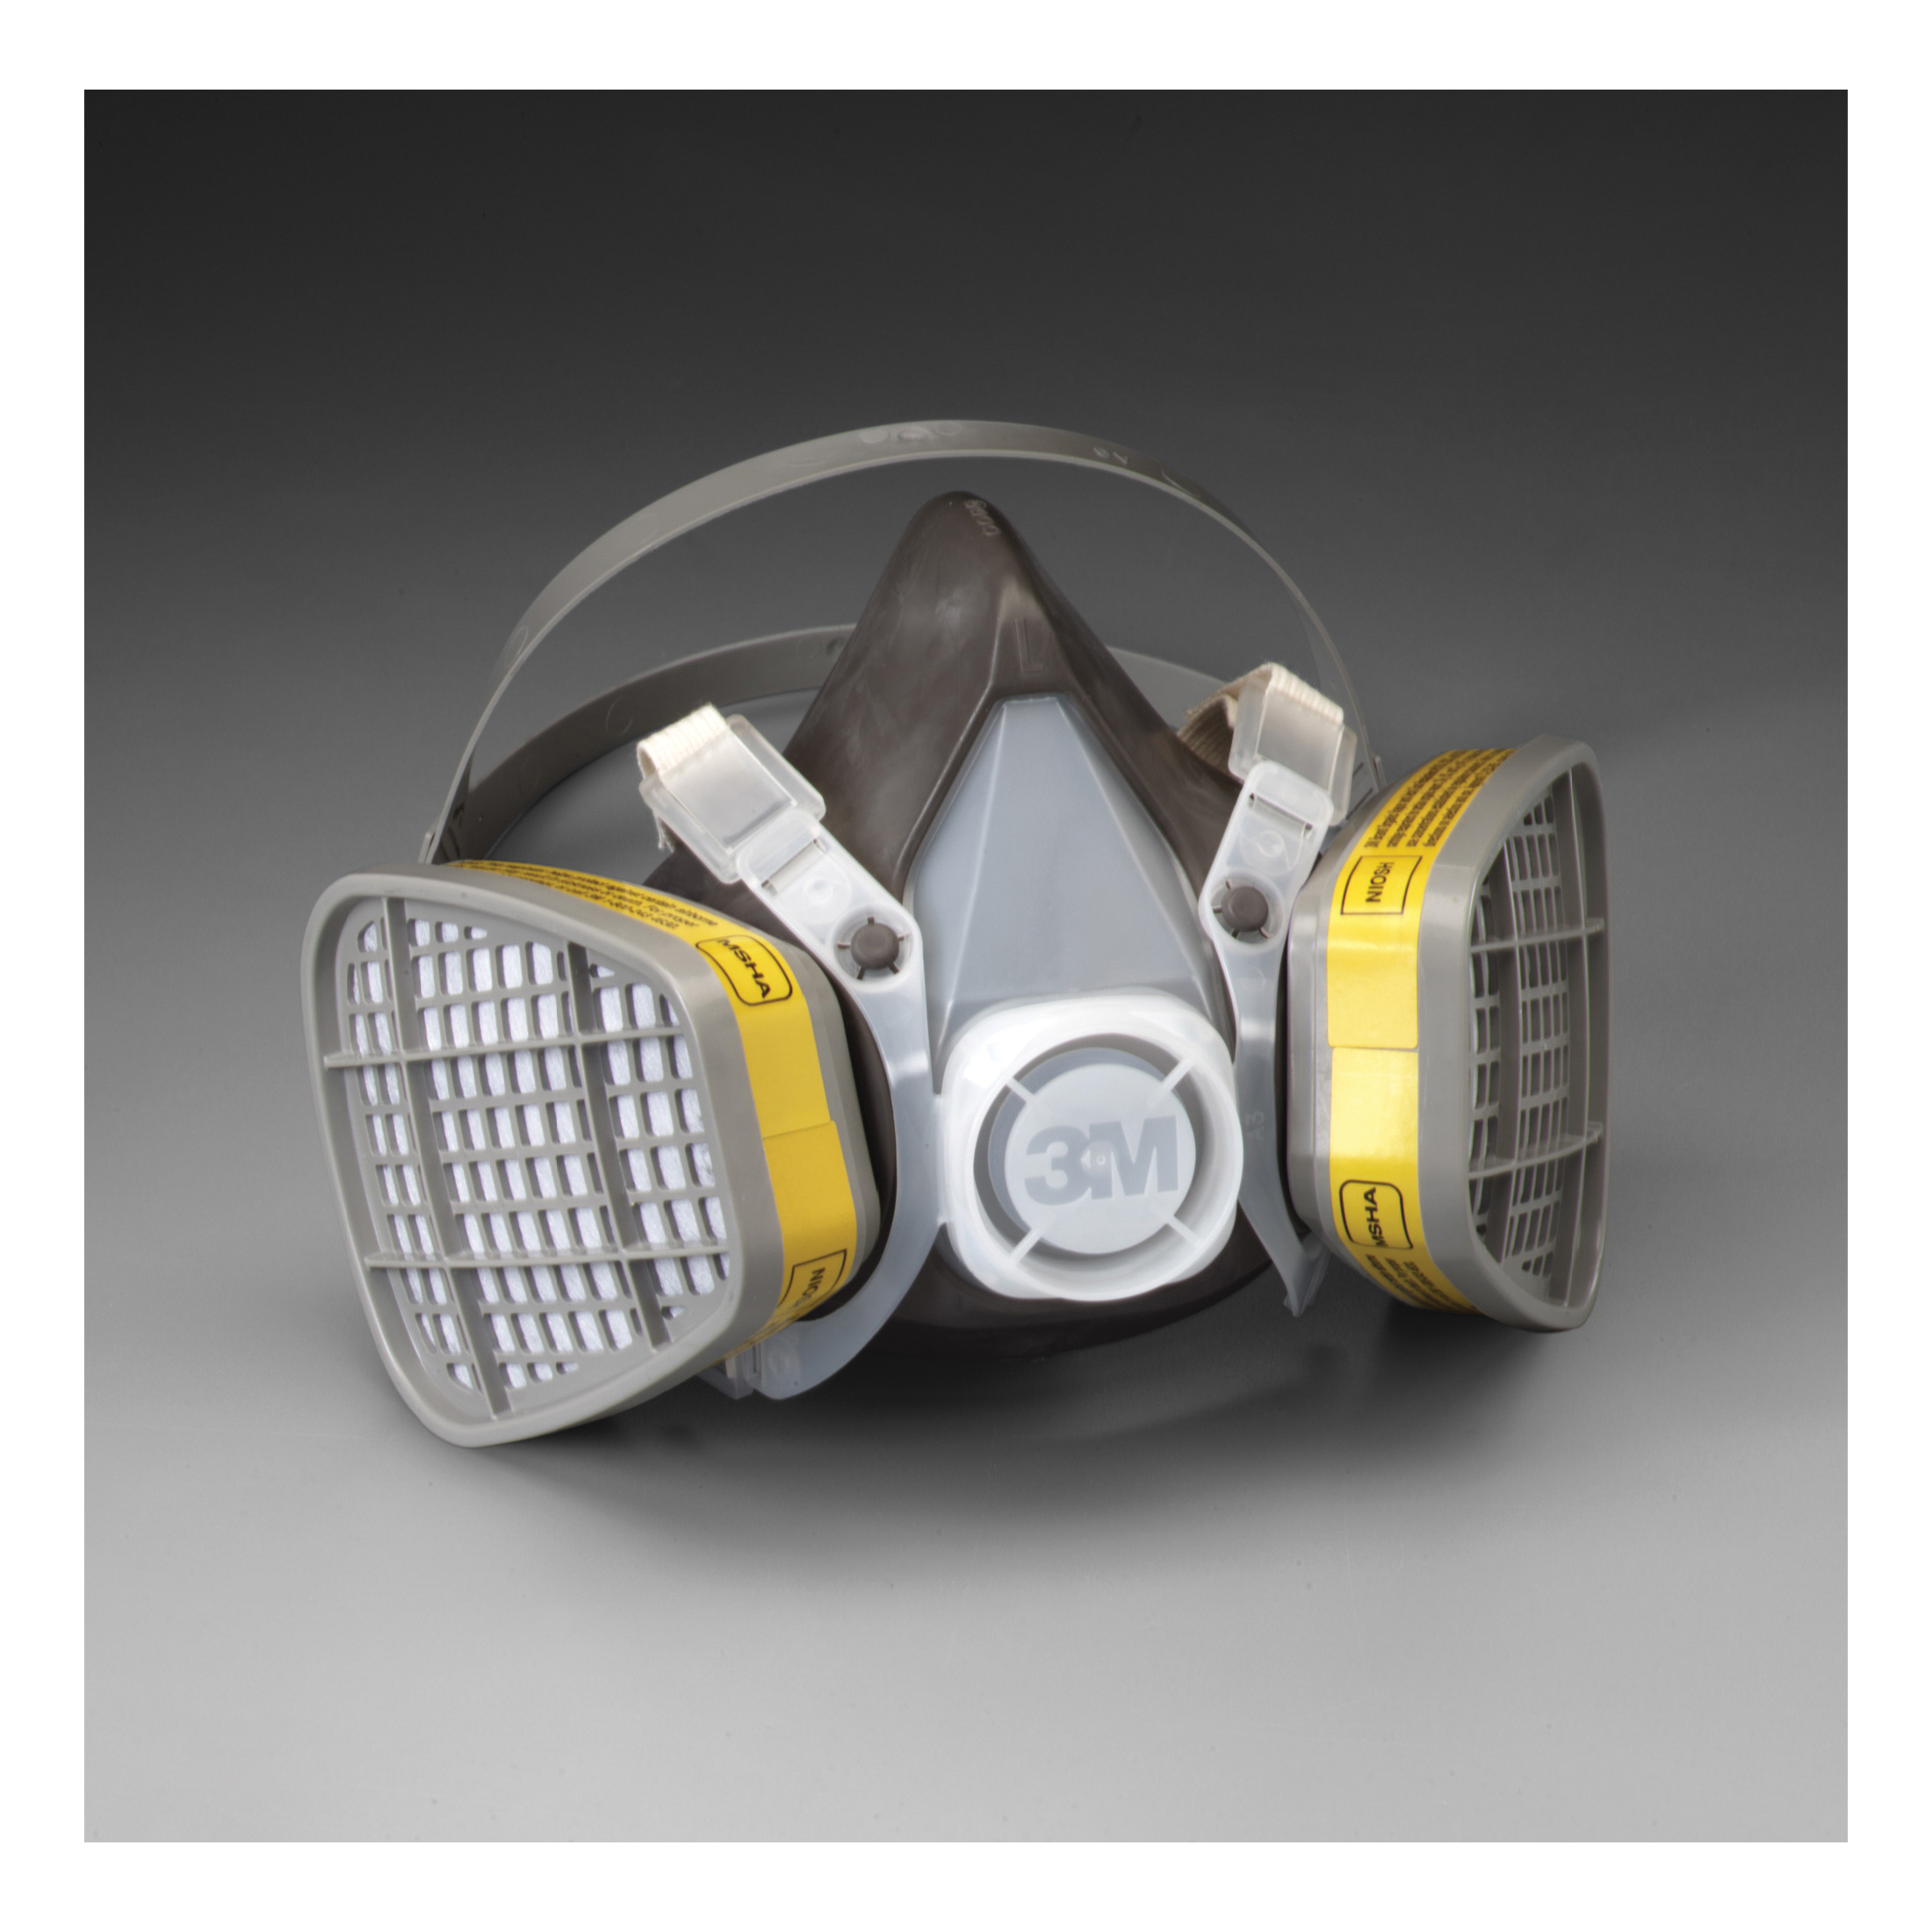 3M™ 051138-21579 5303 5000 Disposable Half Facepiece Respirator Assembly, L, Resists: Acid Gas, Chlorine, Hydrogen Chloride, Hydrogen Fluoride, Hydrogen Sulfide, Organic Vapors and Sulfur Dioxide